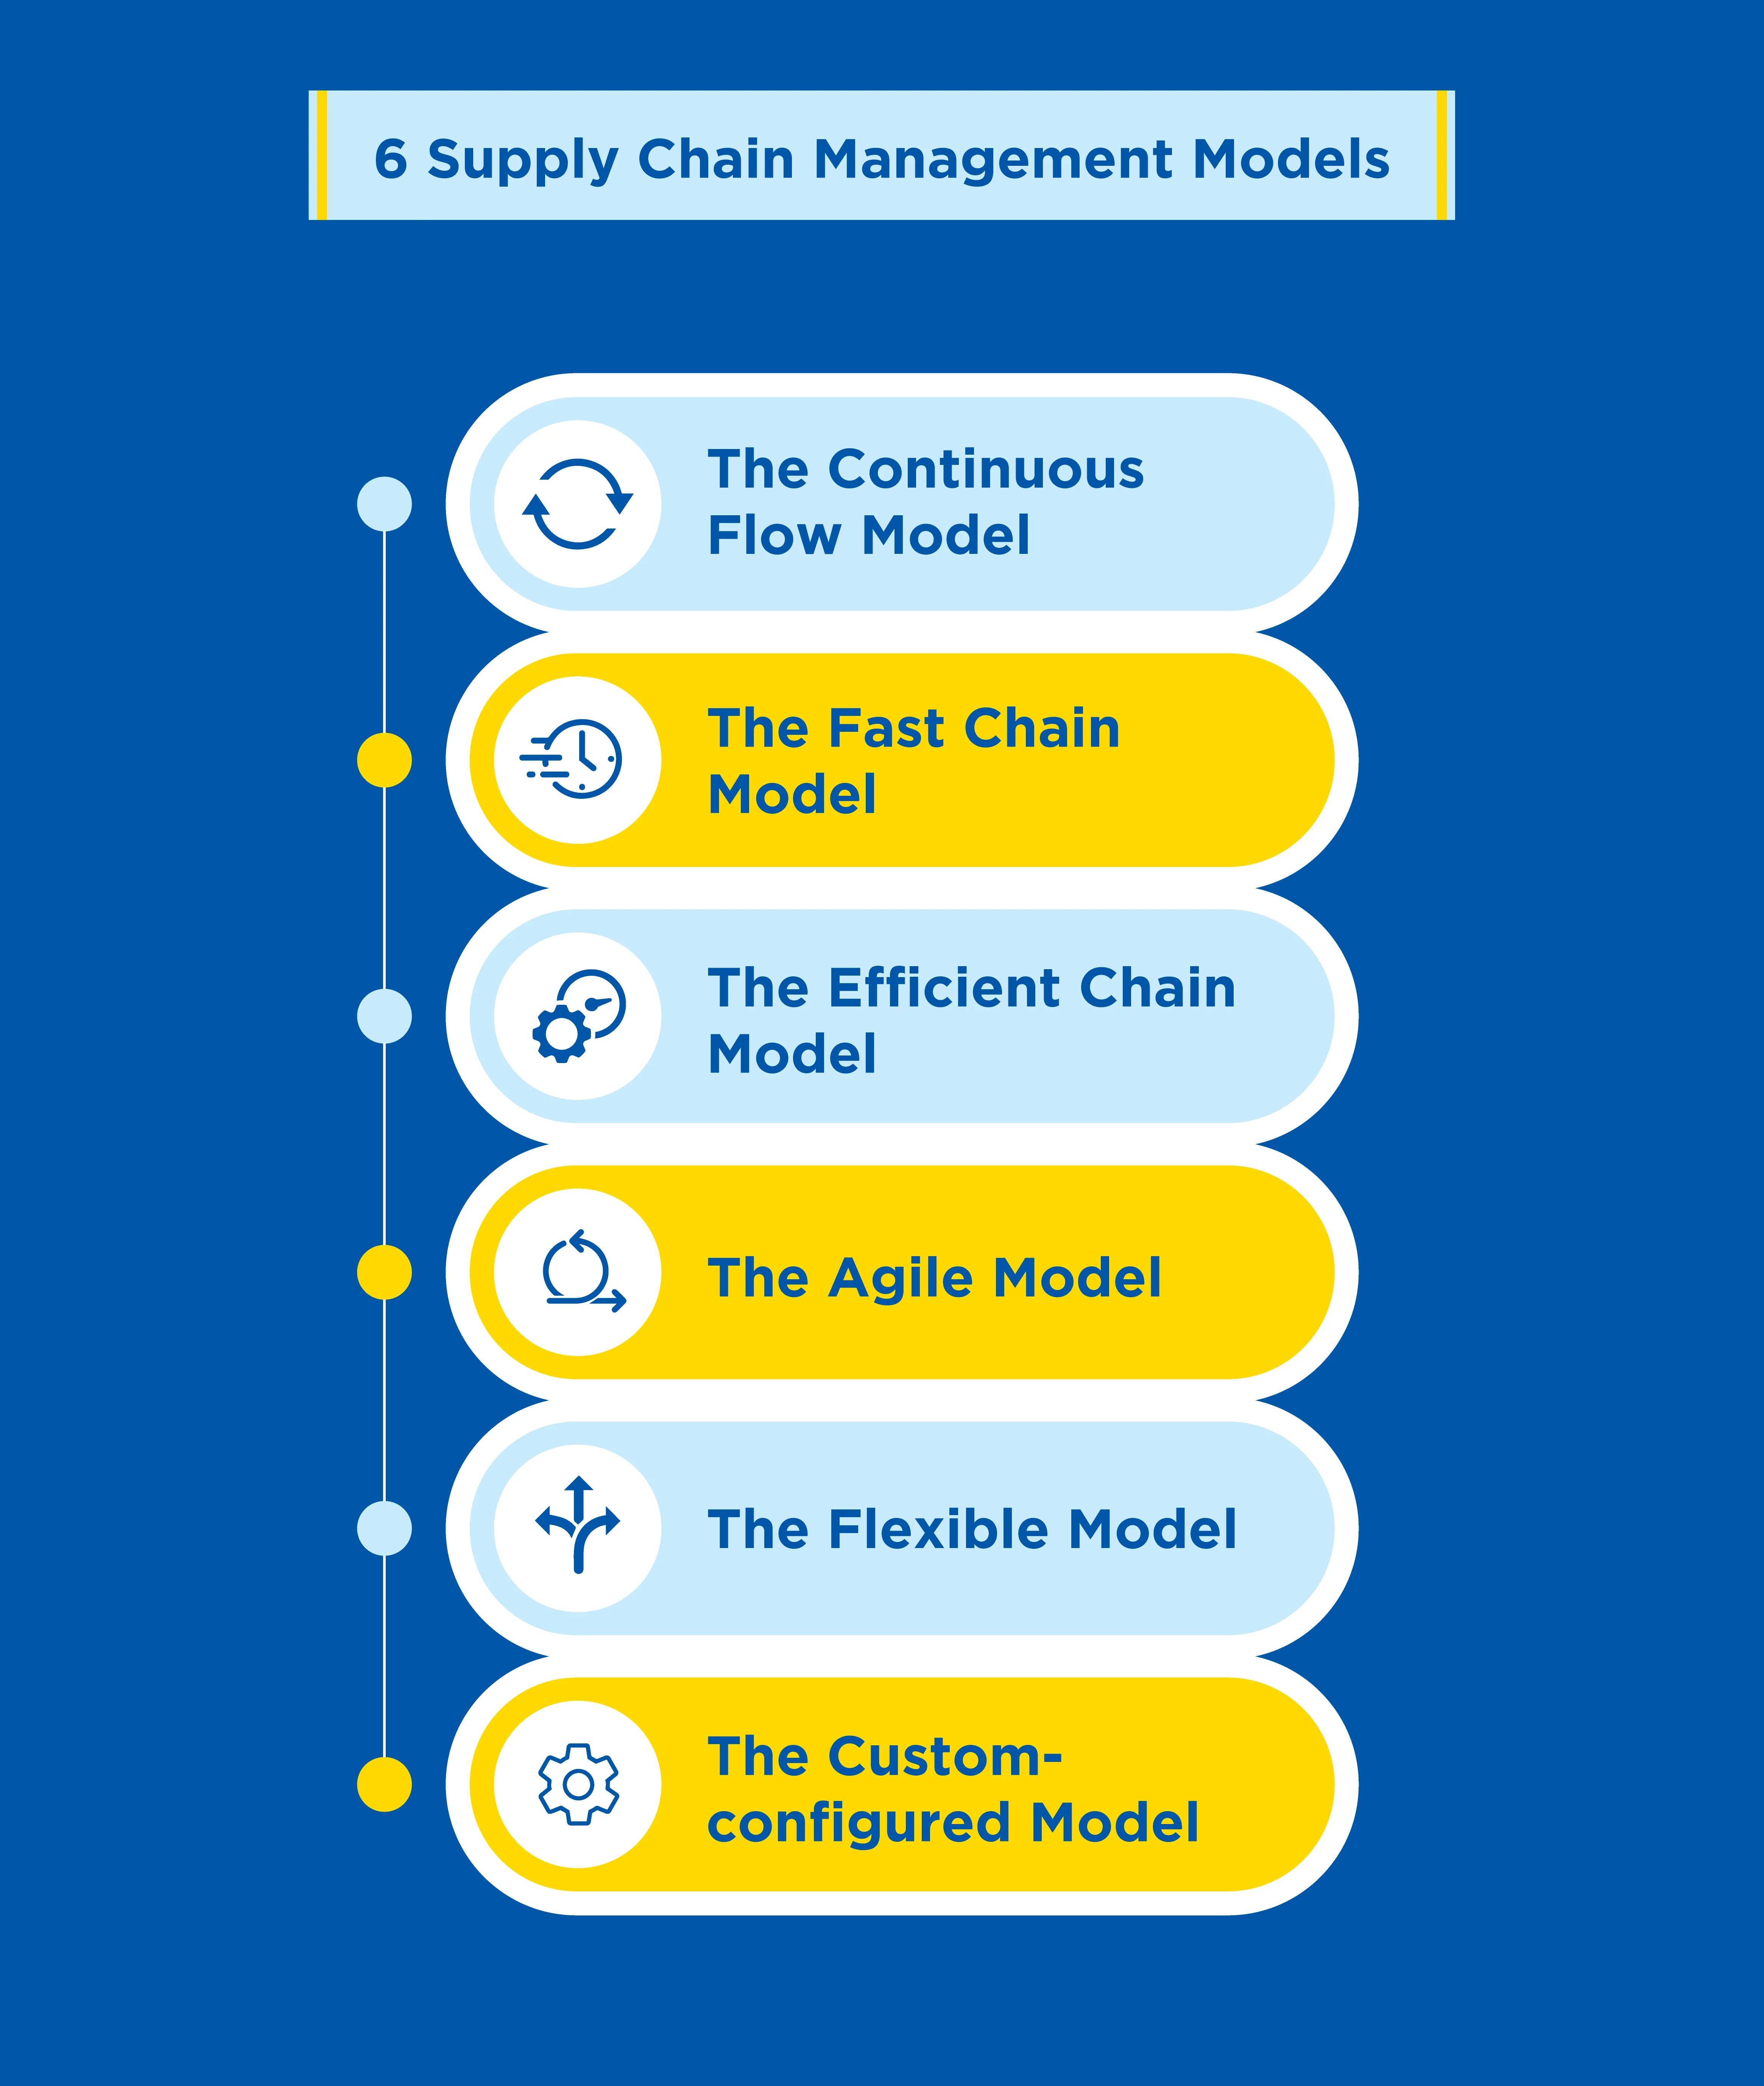 Supply Chain Management Models